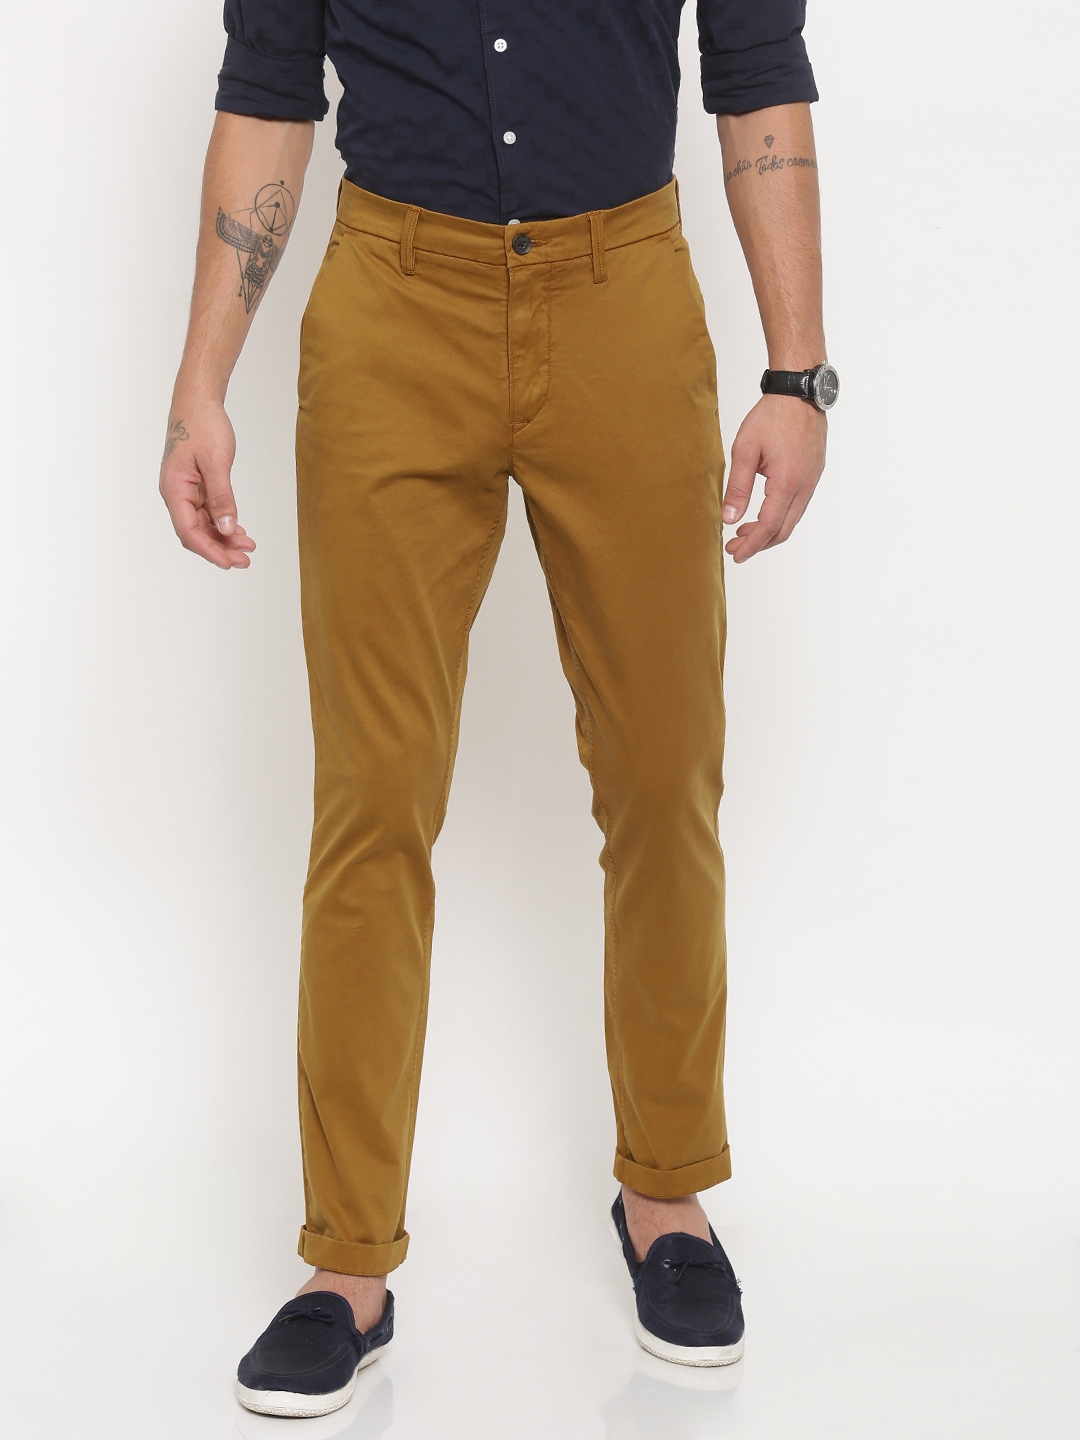 Buy Timberland Men Mustard Yellow Skinny Fit Solid Chinos - Trousers for Men  2008558 | Myntra